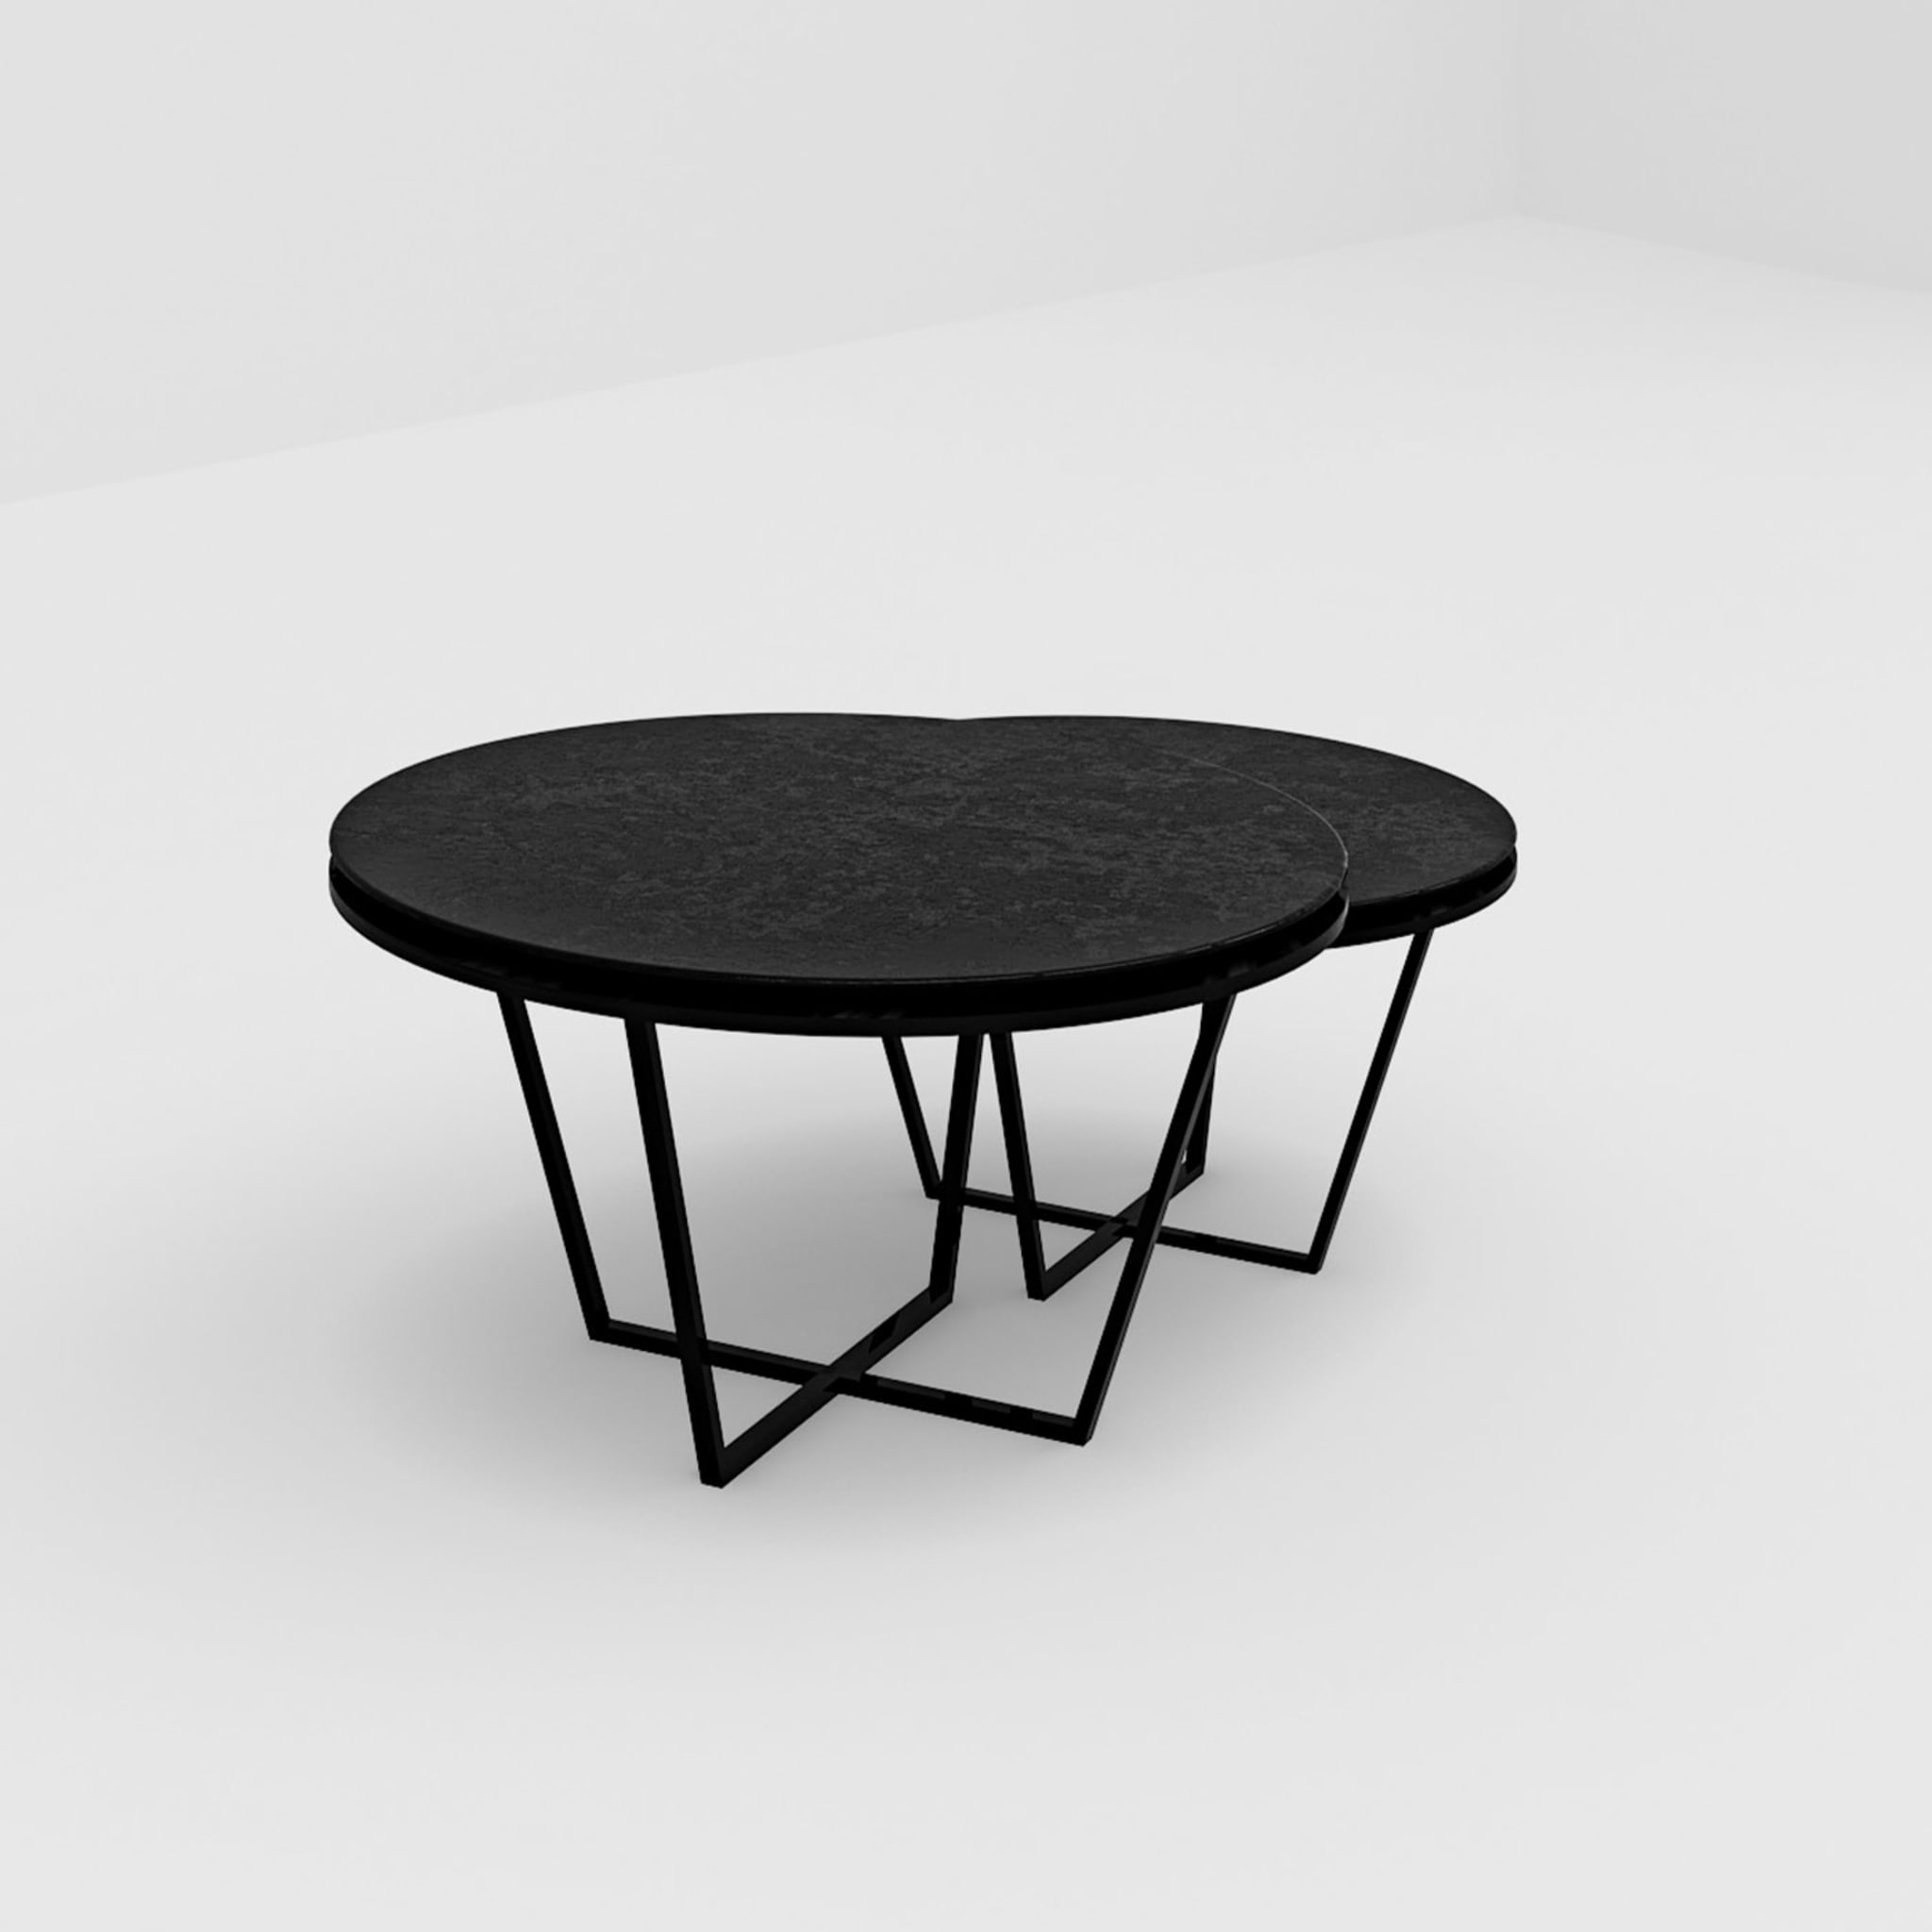 Set of 2 Different-Height Round Black Coffee Tables - Alternative view 2